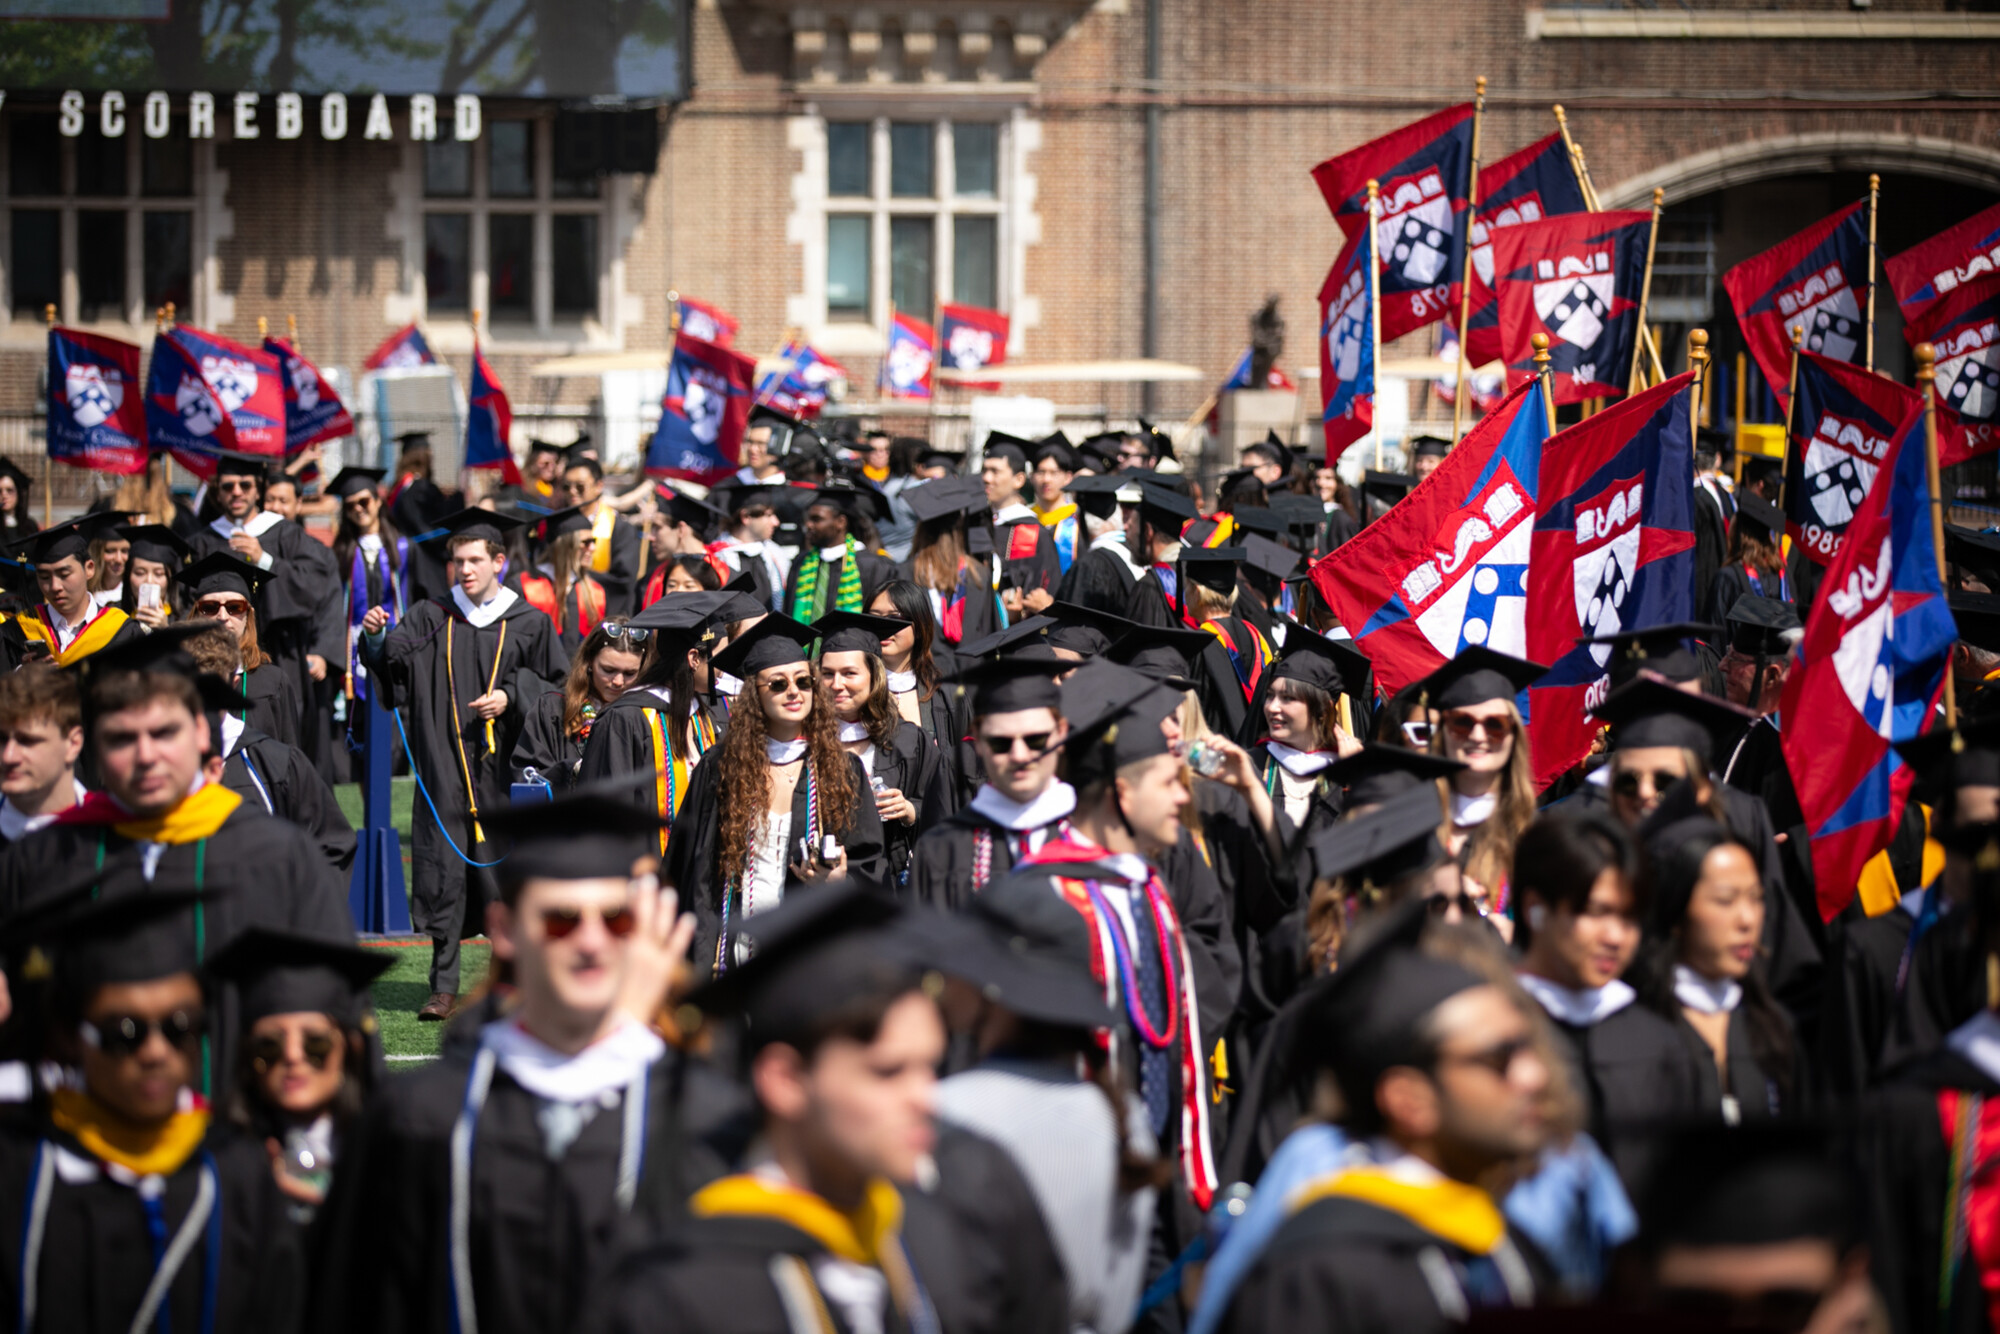 student procession during commencement